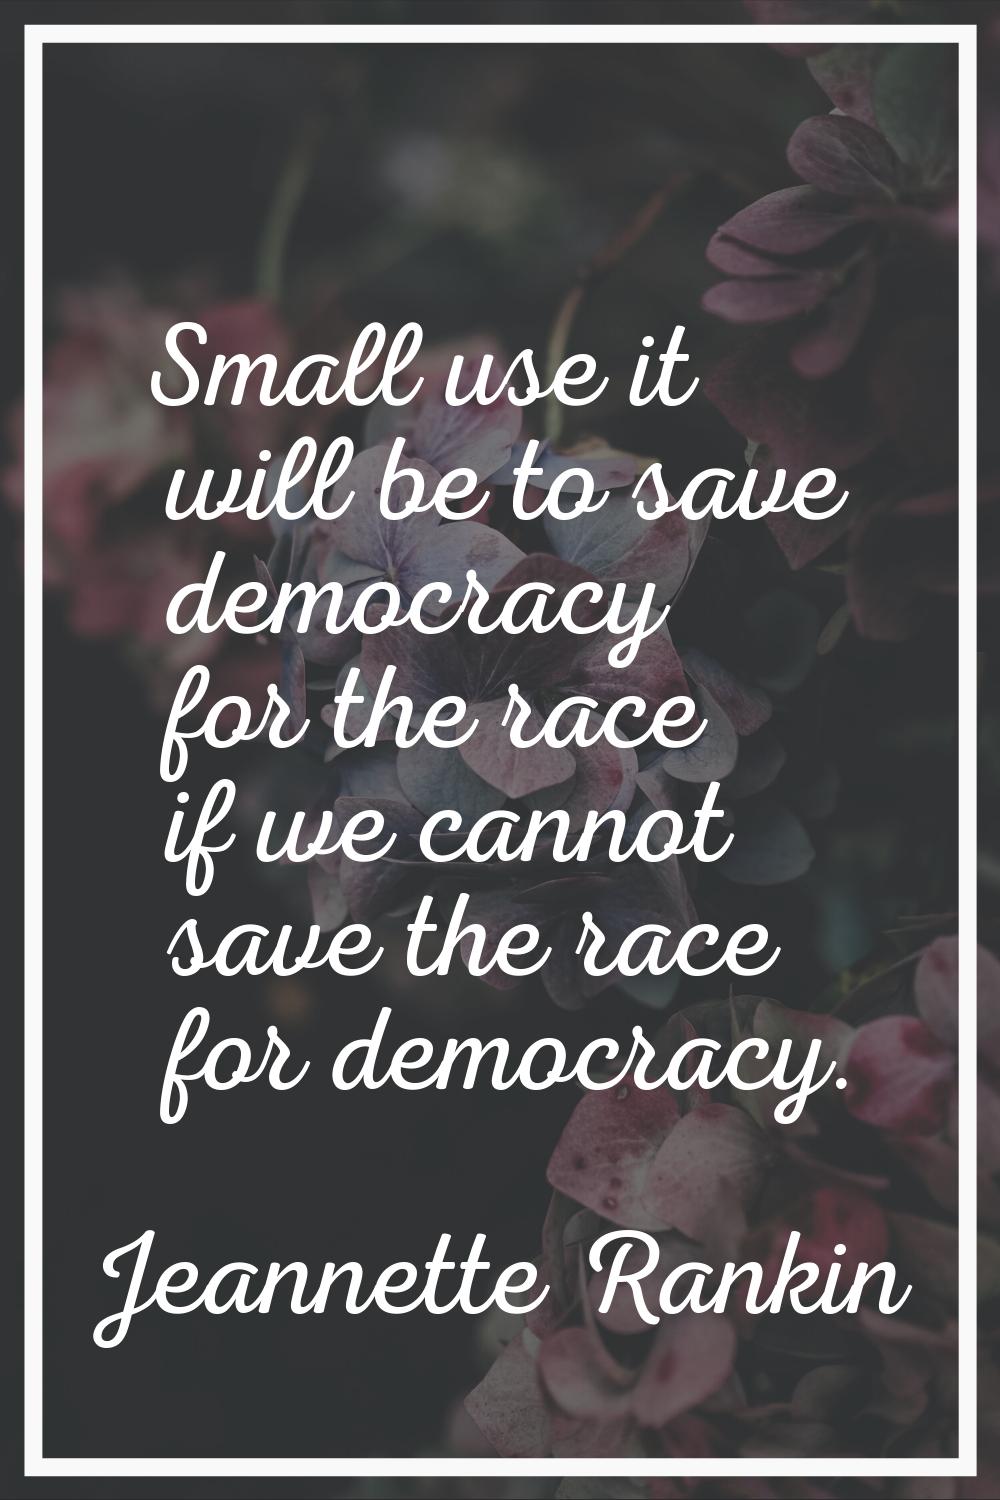 Small use it will be to save democracy for the race if we cannot save the race for democracy.